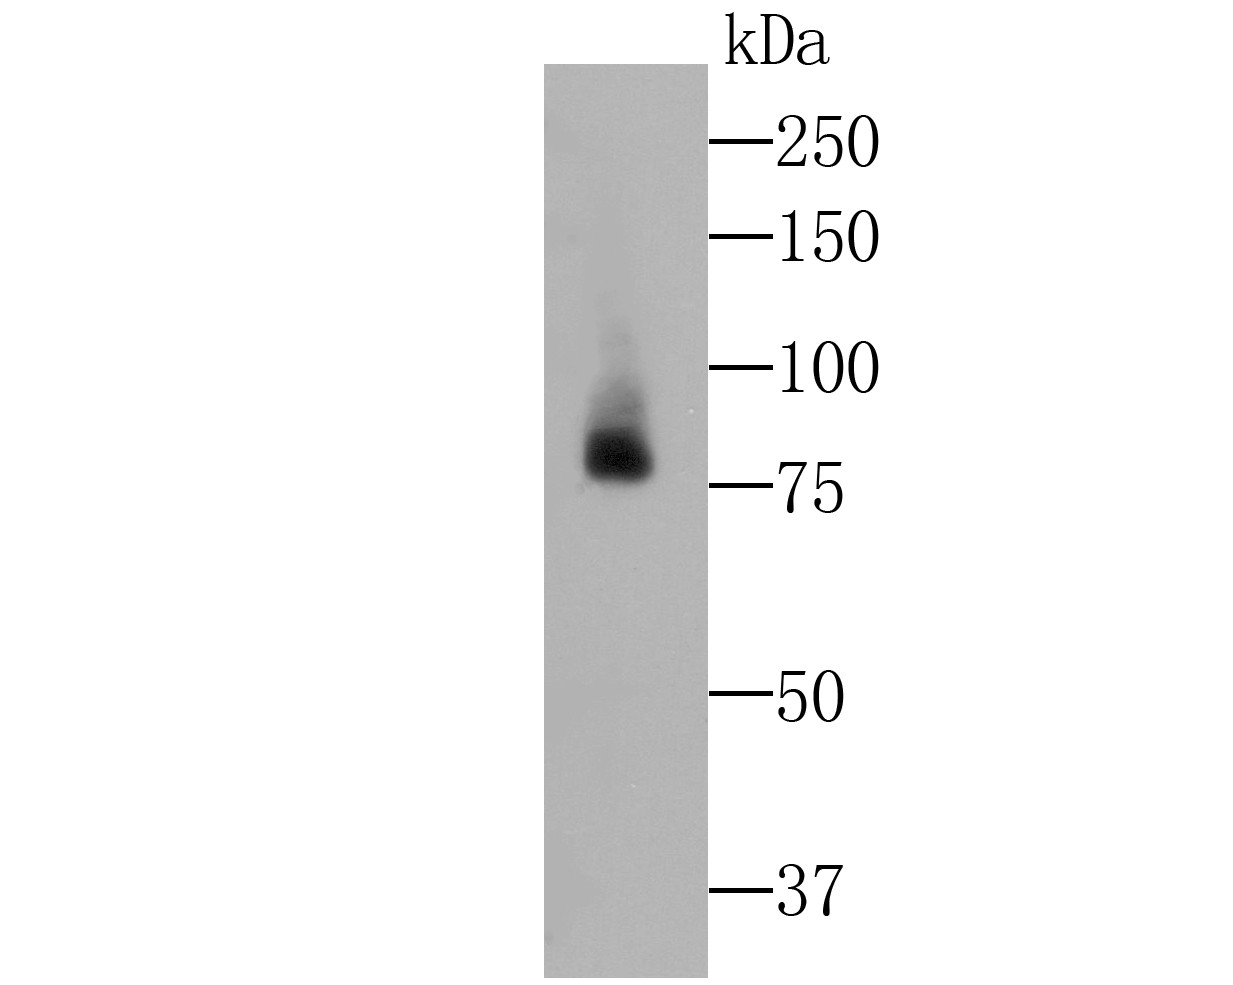 Western blot analysis of Lactoferrin on human kidney tissue lysate. Proteins were transferred to a PVDF membrane and blocked with 5% BSA in PBS for 1 hour at room temperature. The primary antibody was used at a 1:500 dilution in 5% BSA at room temperature for 2 hours. Goat Anti-Rabbit IgG - HRP Secondary Antibody (HA1001) at 1:5,000 dilution was used for 1 hour at room temperature.